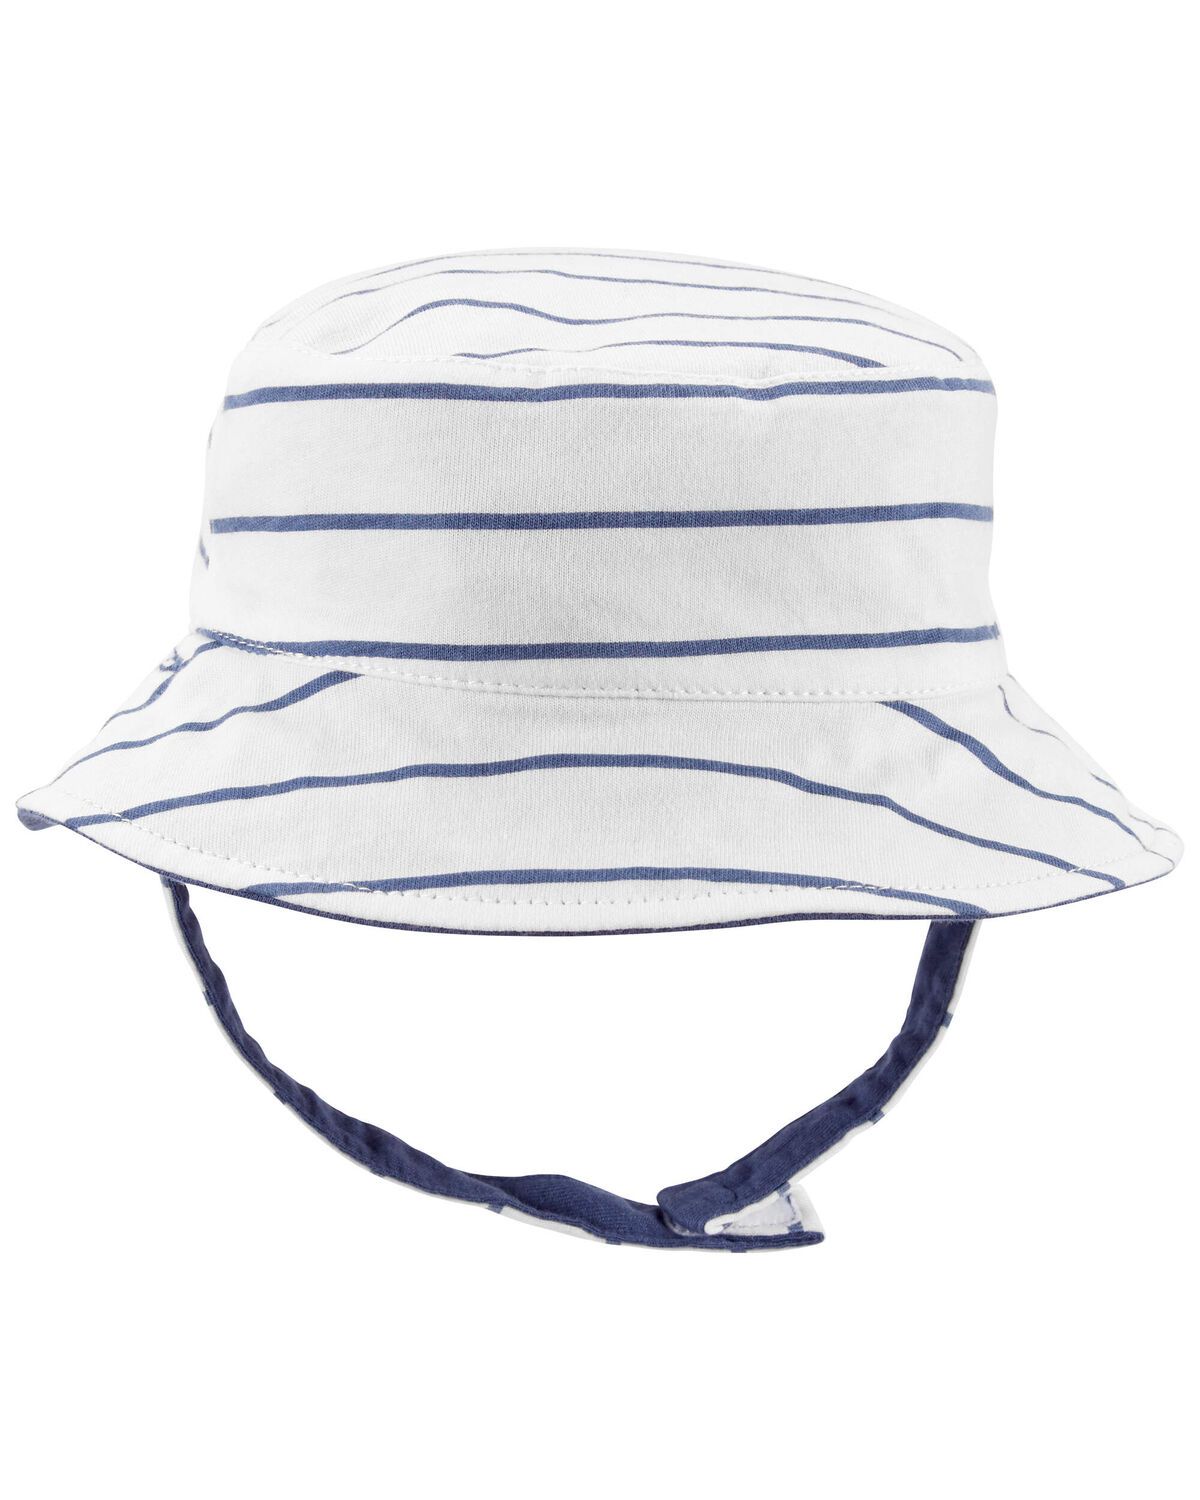 White/Blue Baby Reversible Bucket Hat | carters.com | Carter's